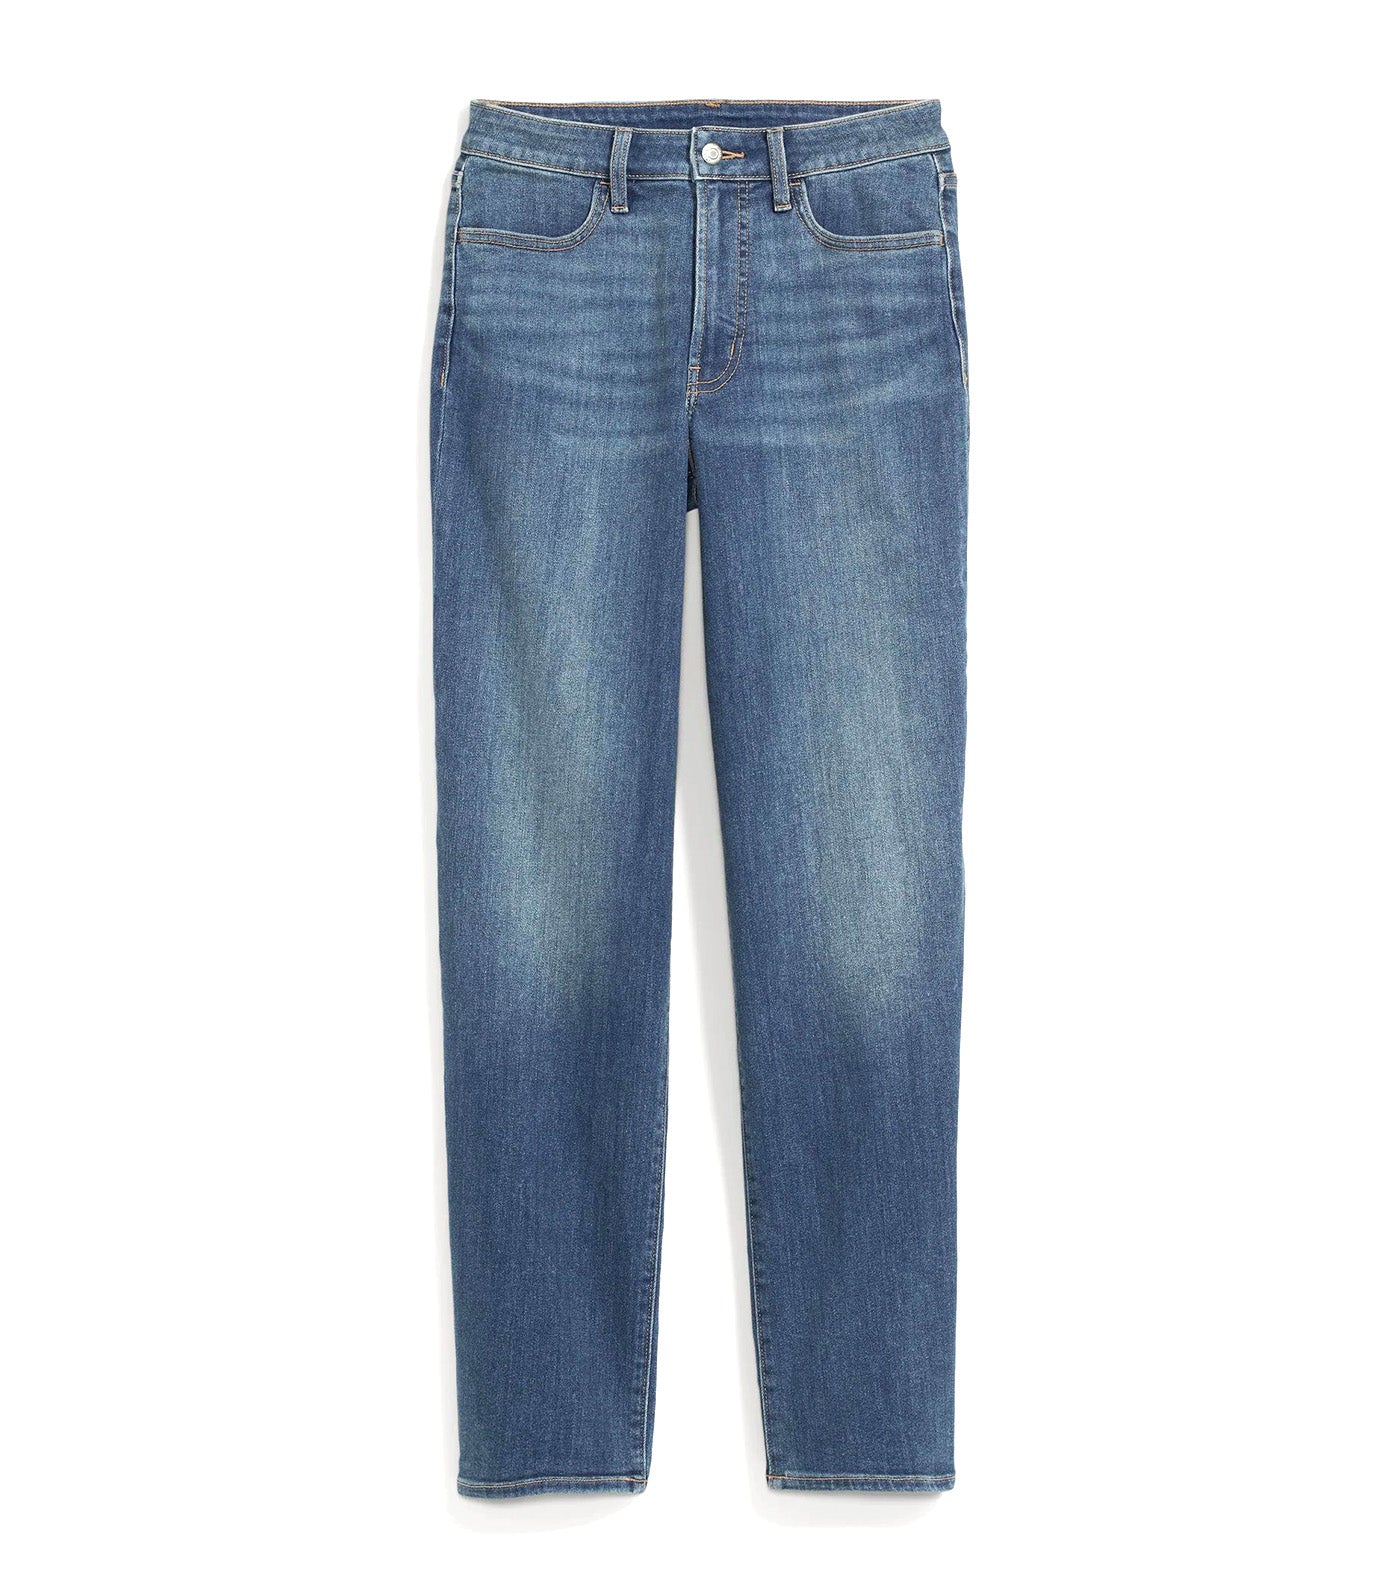 High-Waisted Wow Loose Jeans for Women Campeche